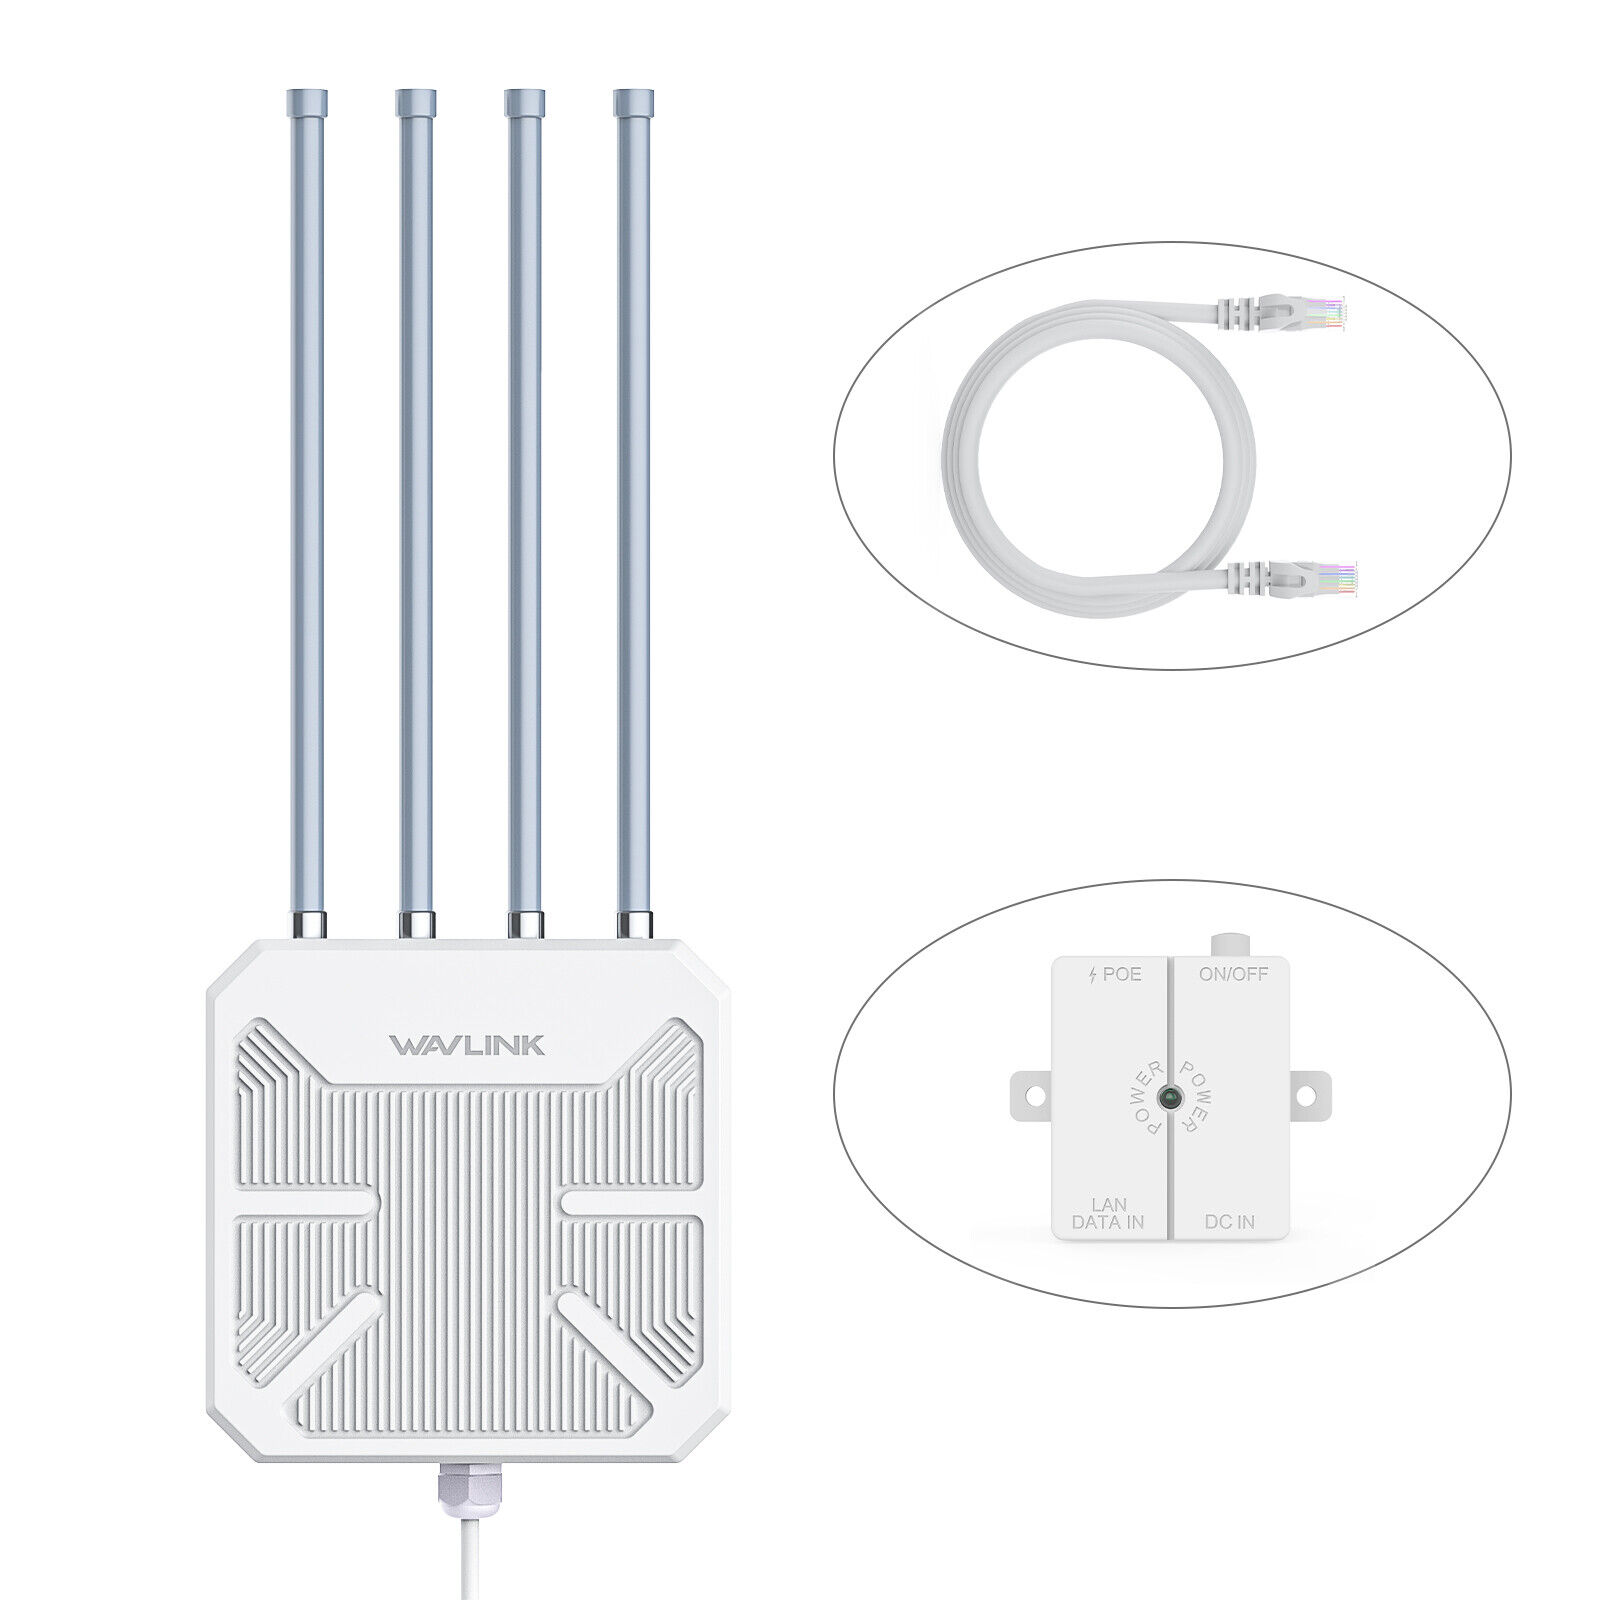 Dual Band 2.4G+5G WiFi6 Outdoor Mesh Router/AP/Repeater with 4x8dBi High-gain